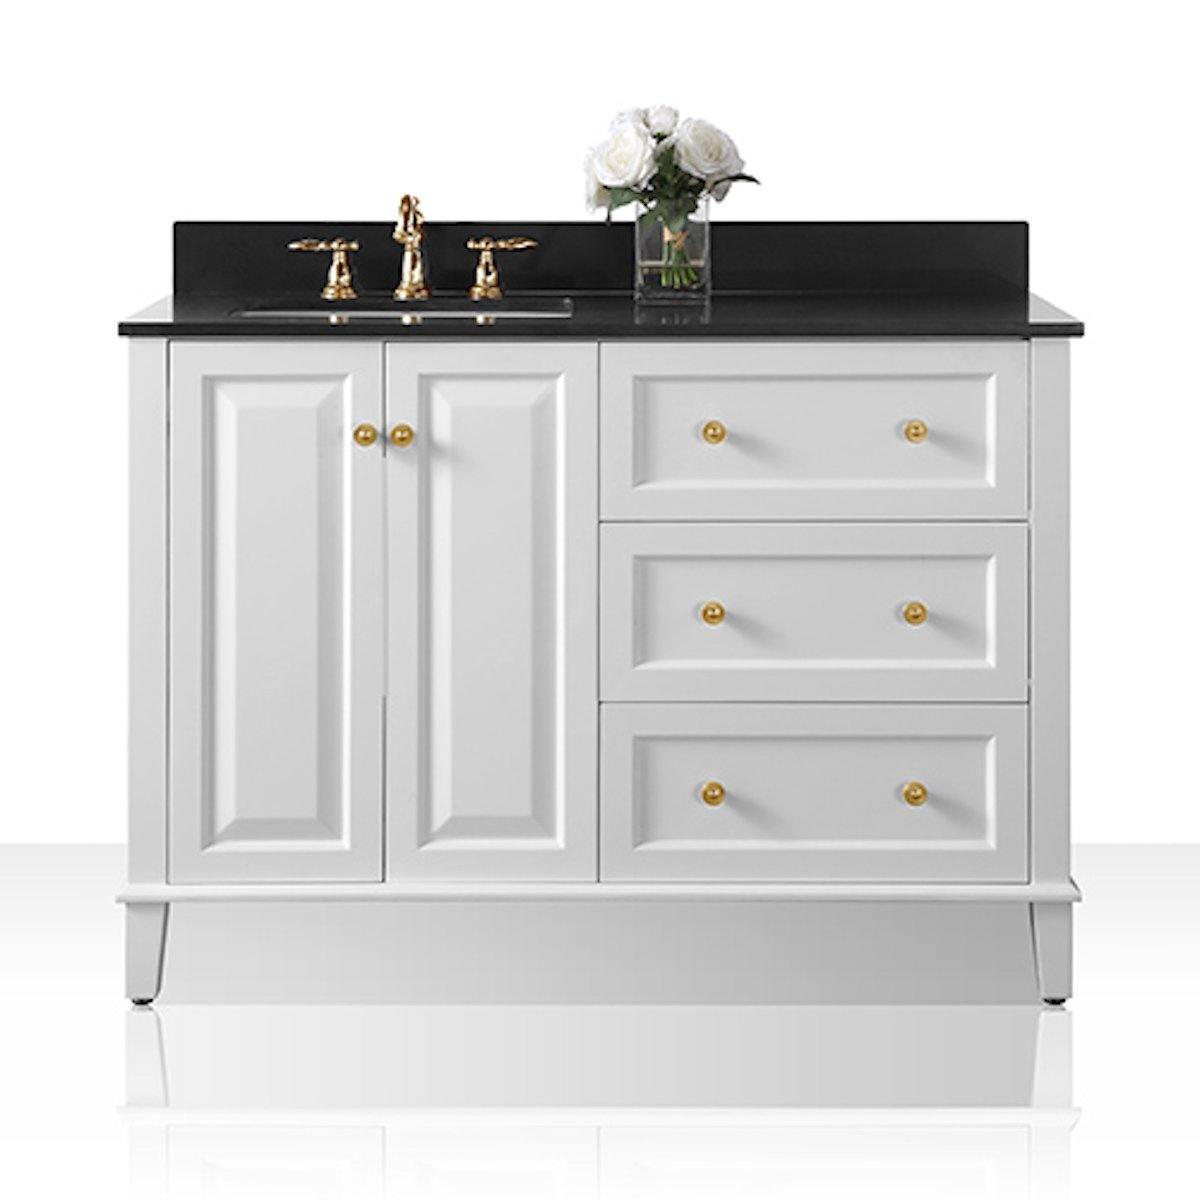 Ancerre Designs Hannah 48 Inch White Single Vanity with Left Basin and Gold Hardware